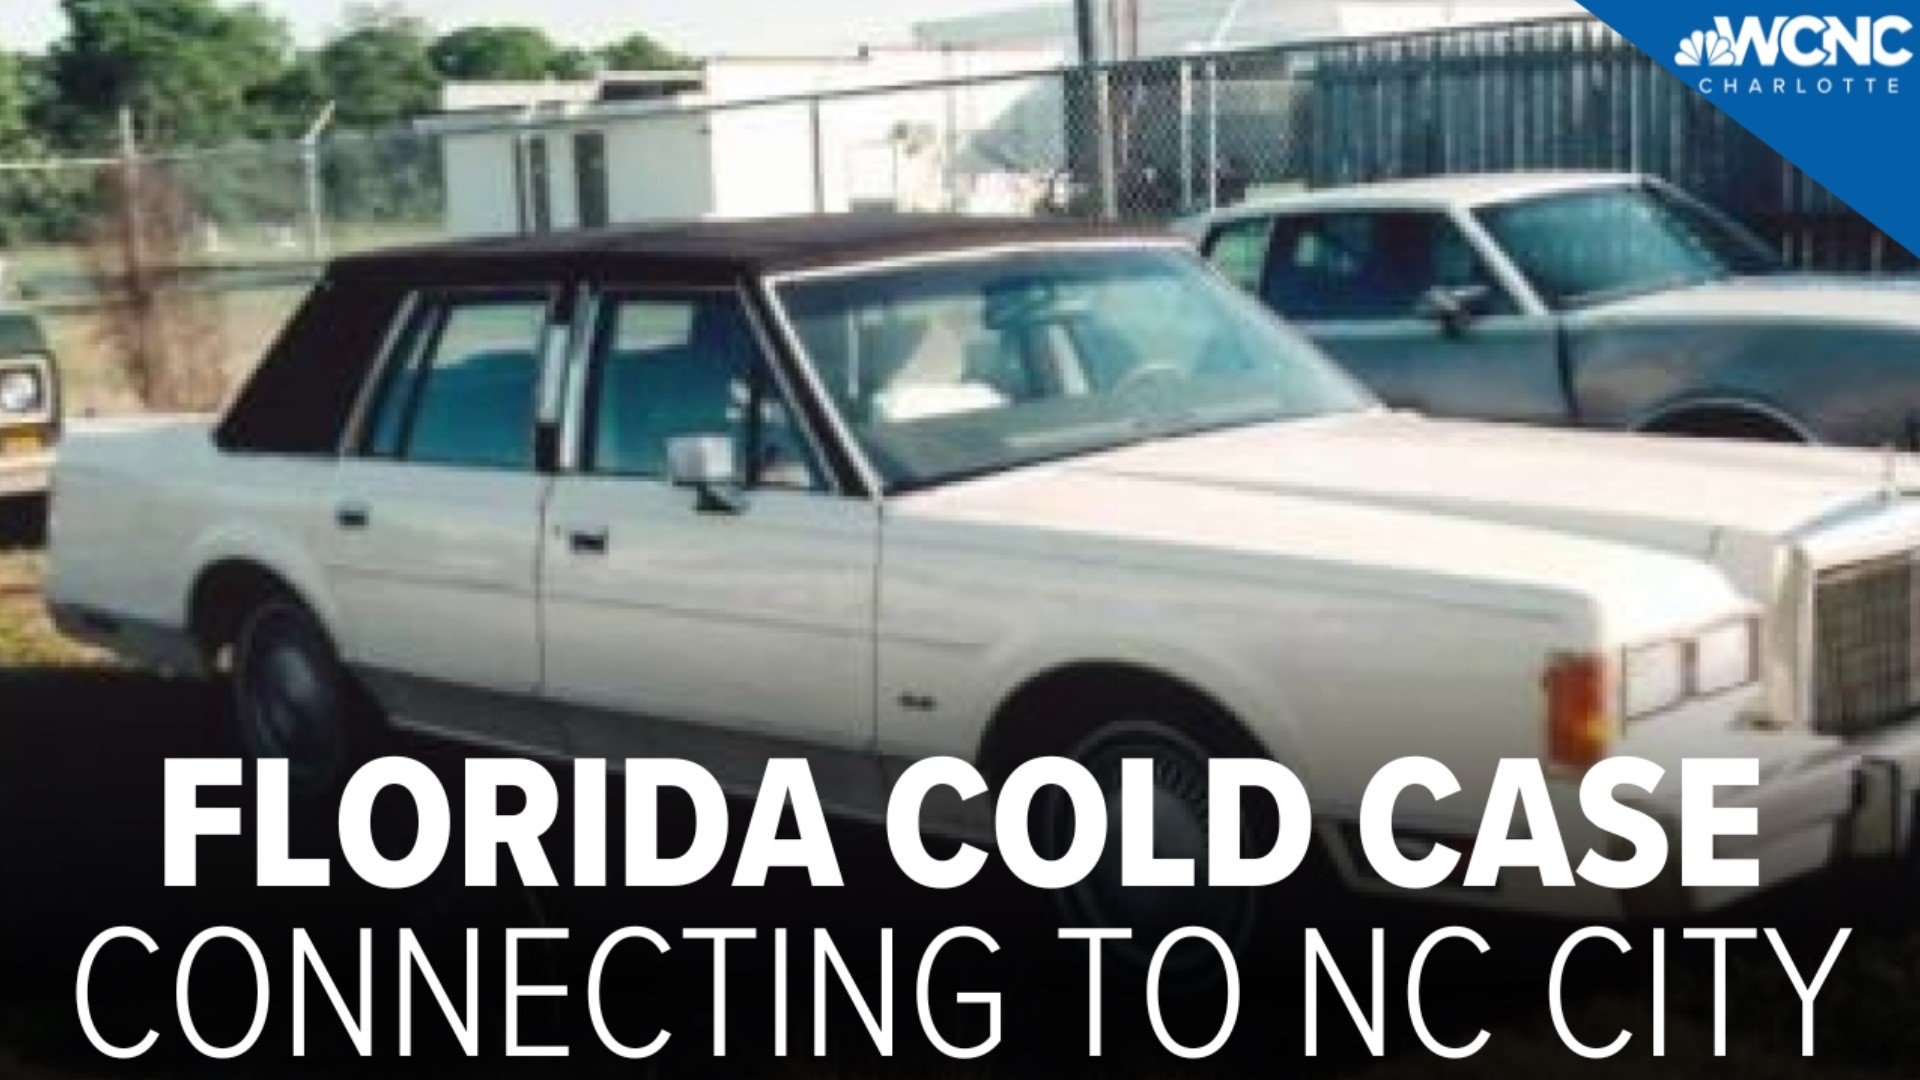 Cold case detectives from Florida are in the Tar Heel State to investigate a murder that's been unsolved for nearly 35 years.